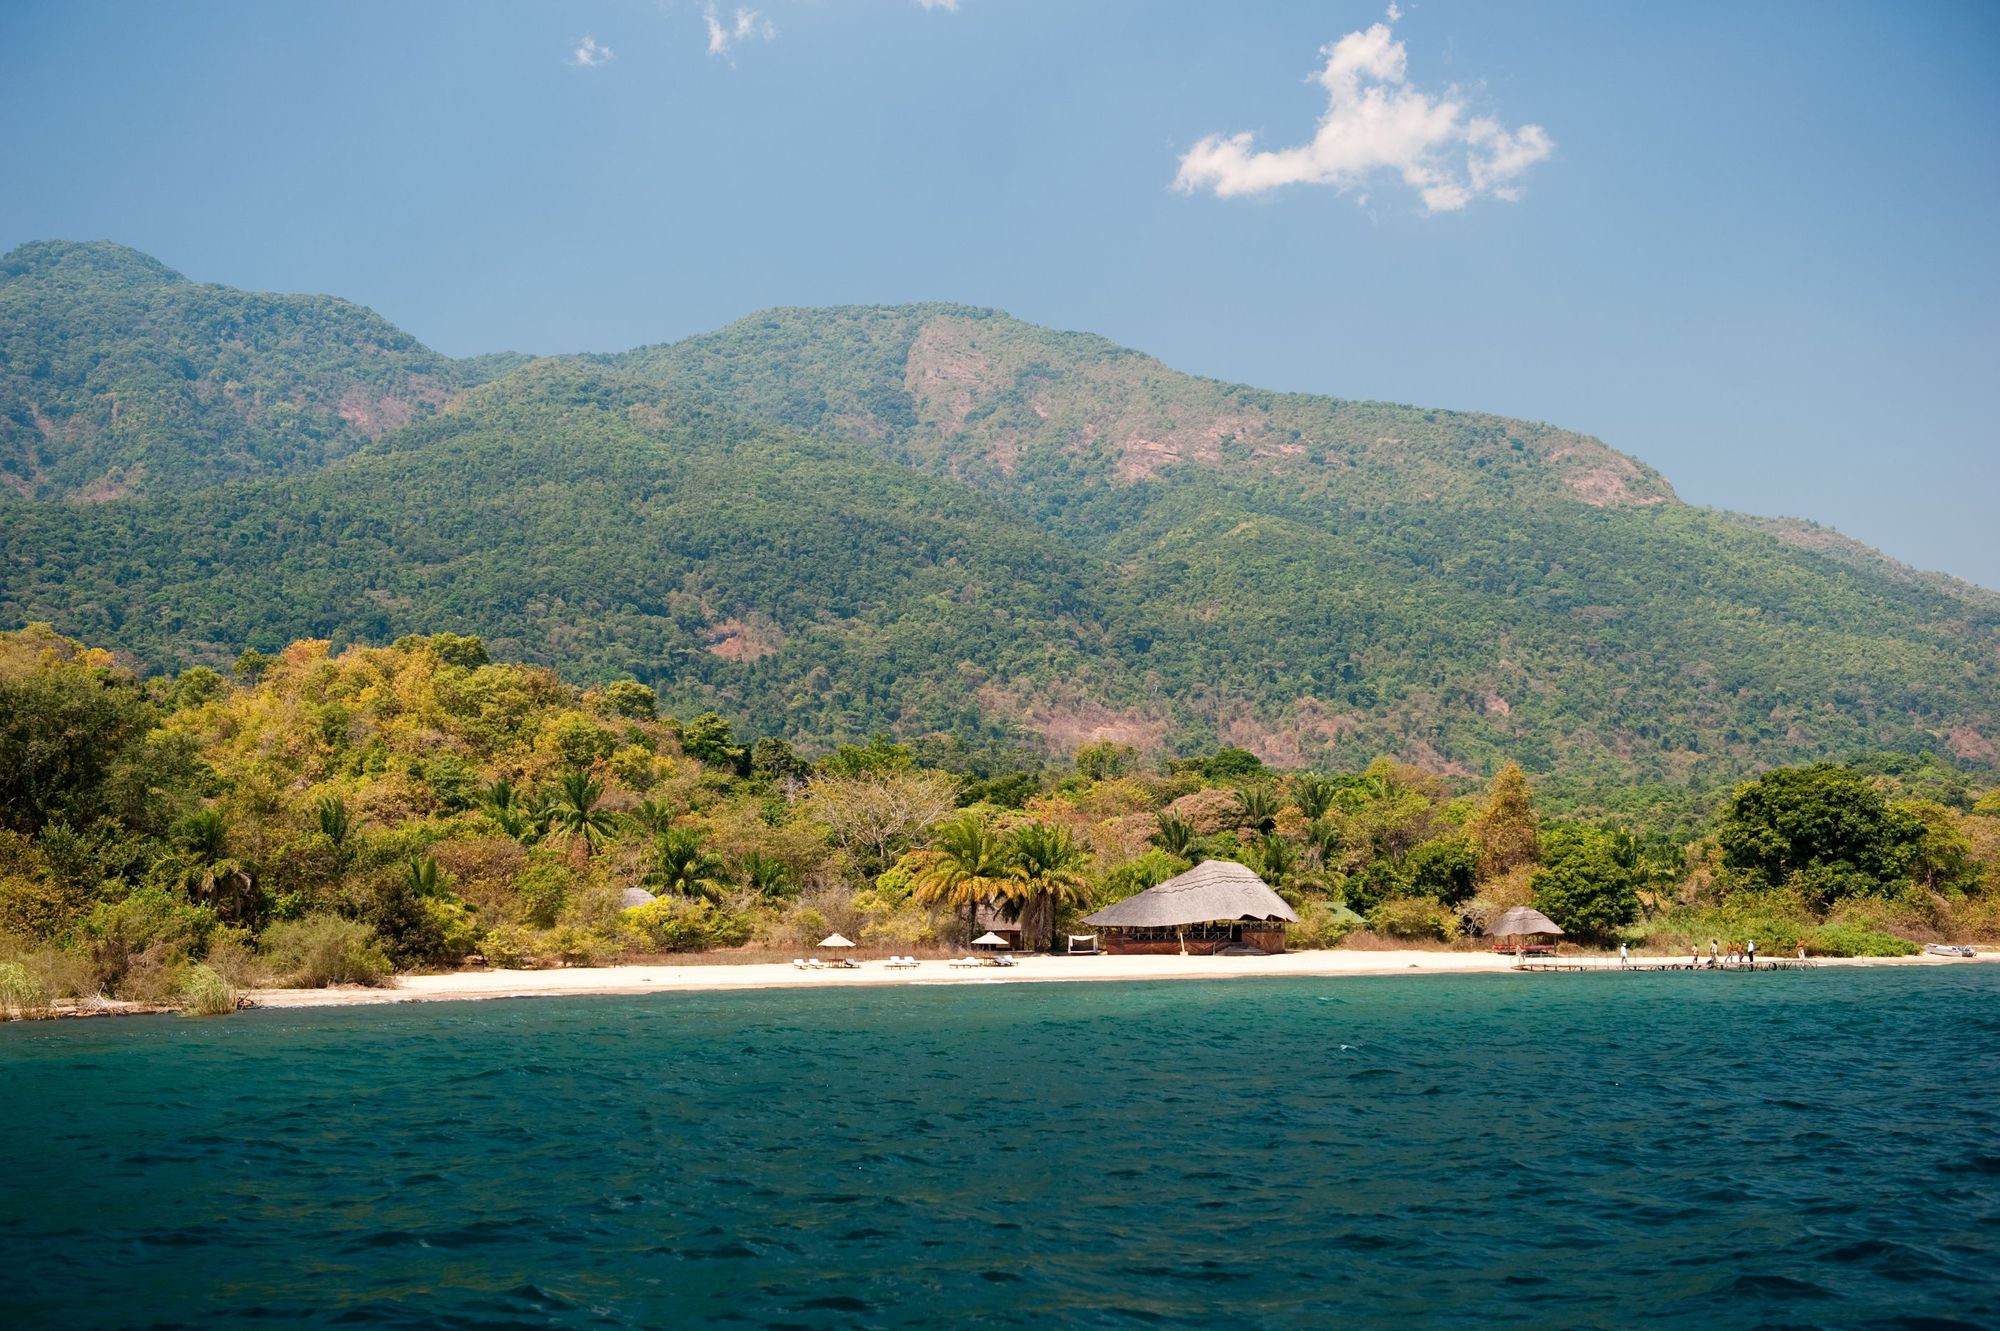 A beach resort looking out on the waters on the edge of the Mahale Mountains. Photo: getty